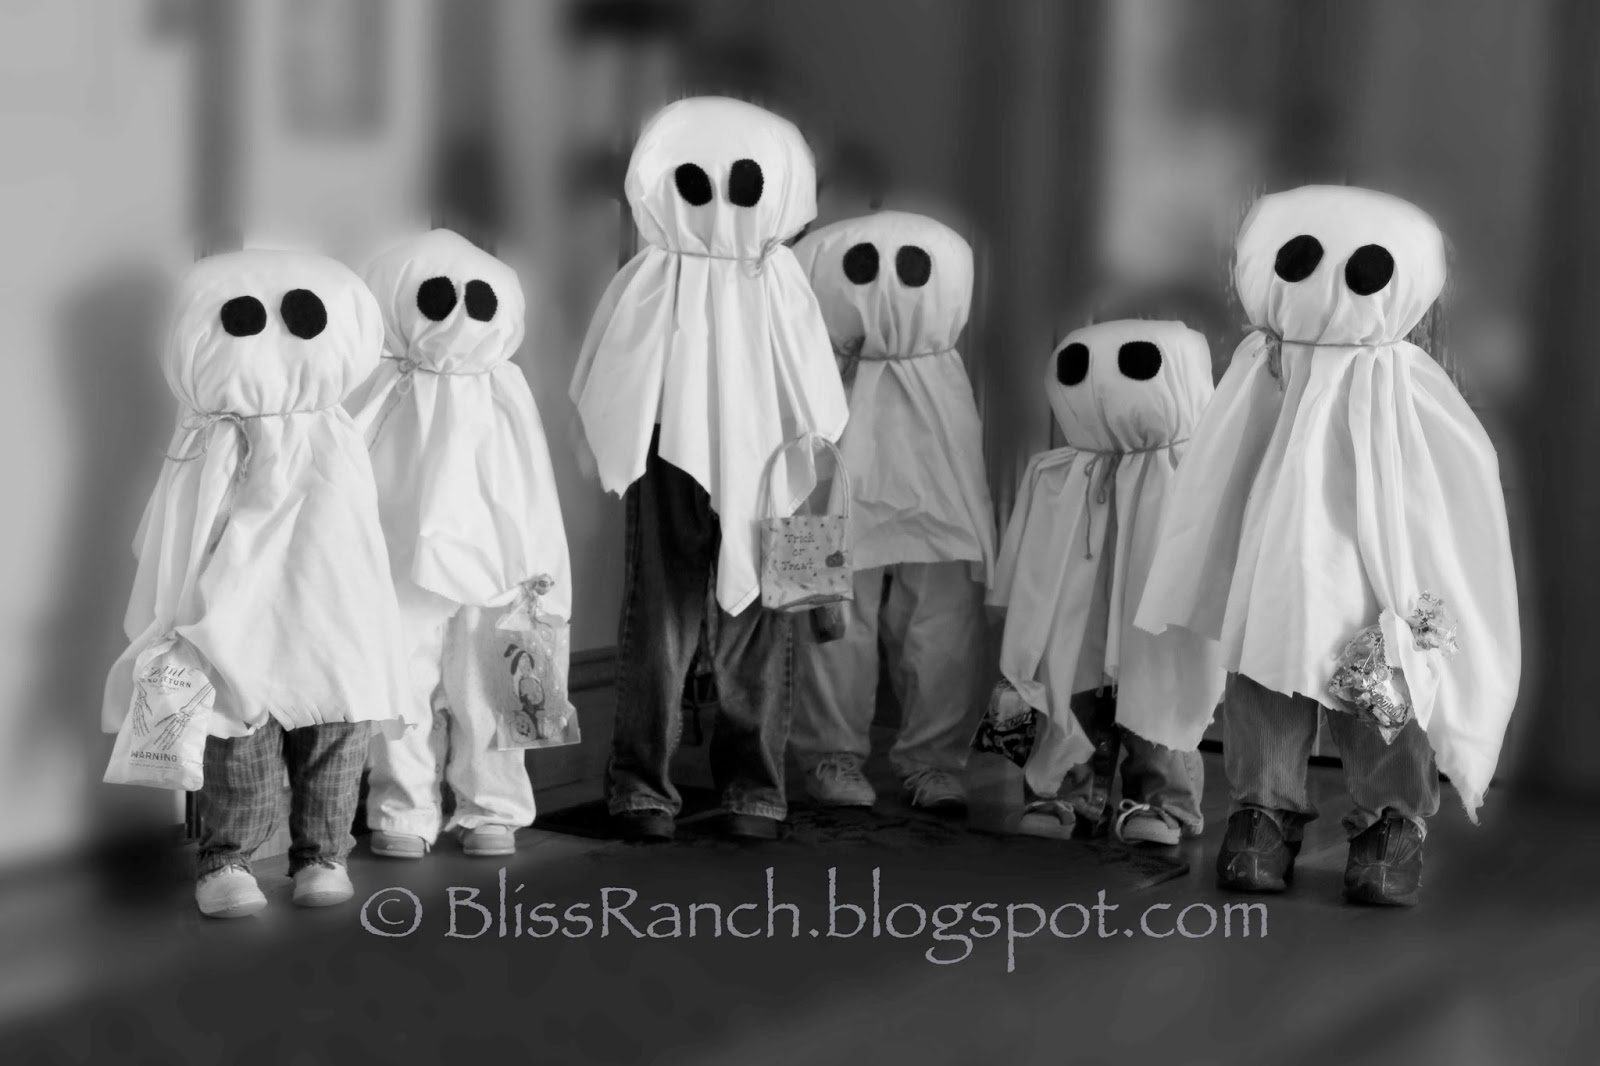 Bliss-Ranch.com How to Make Little Ghosts